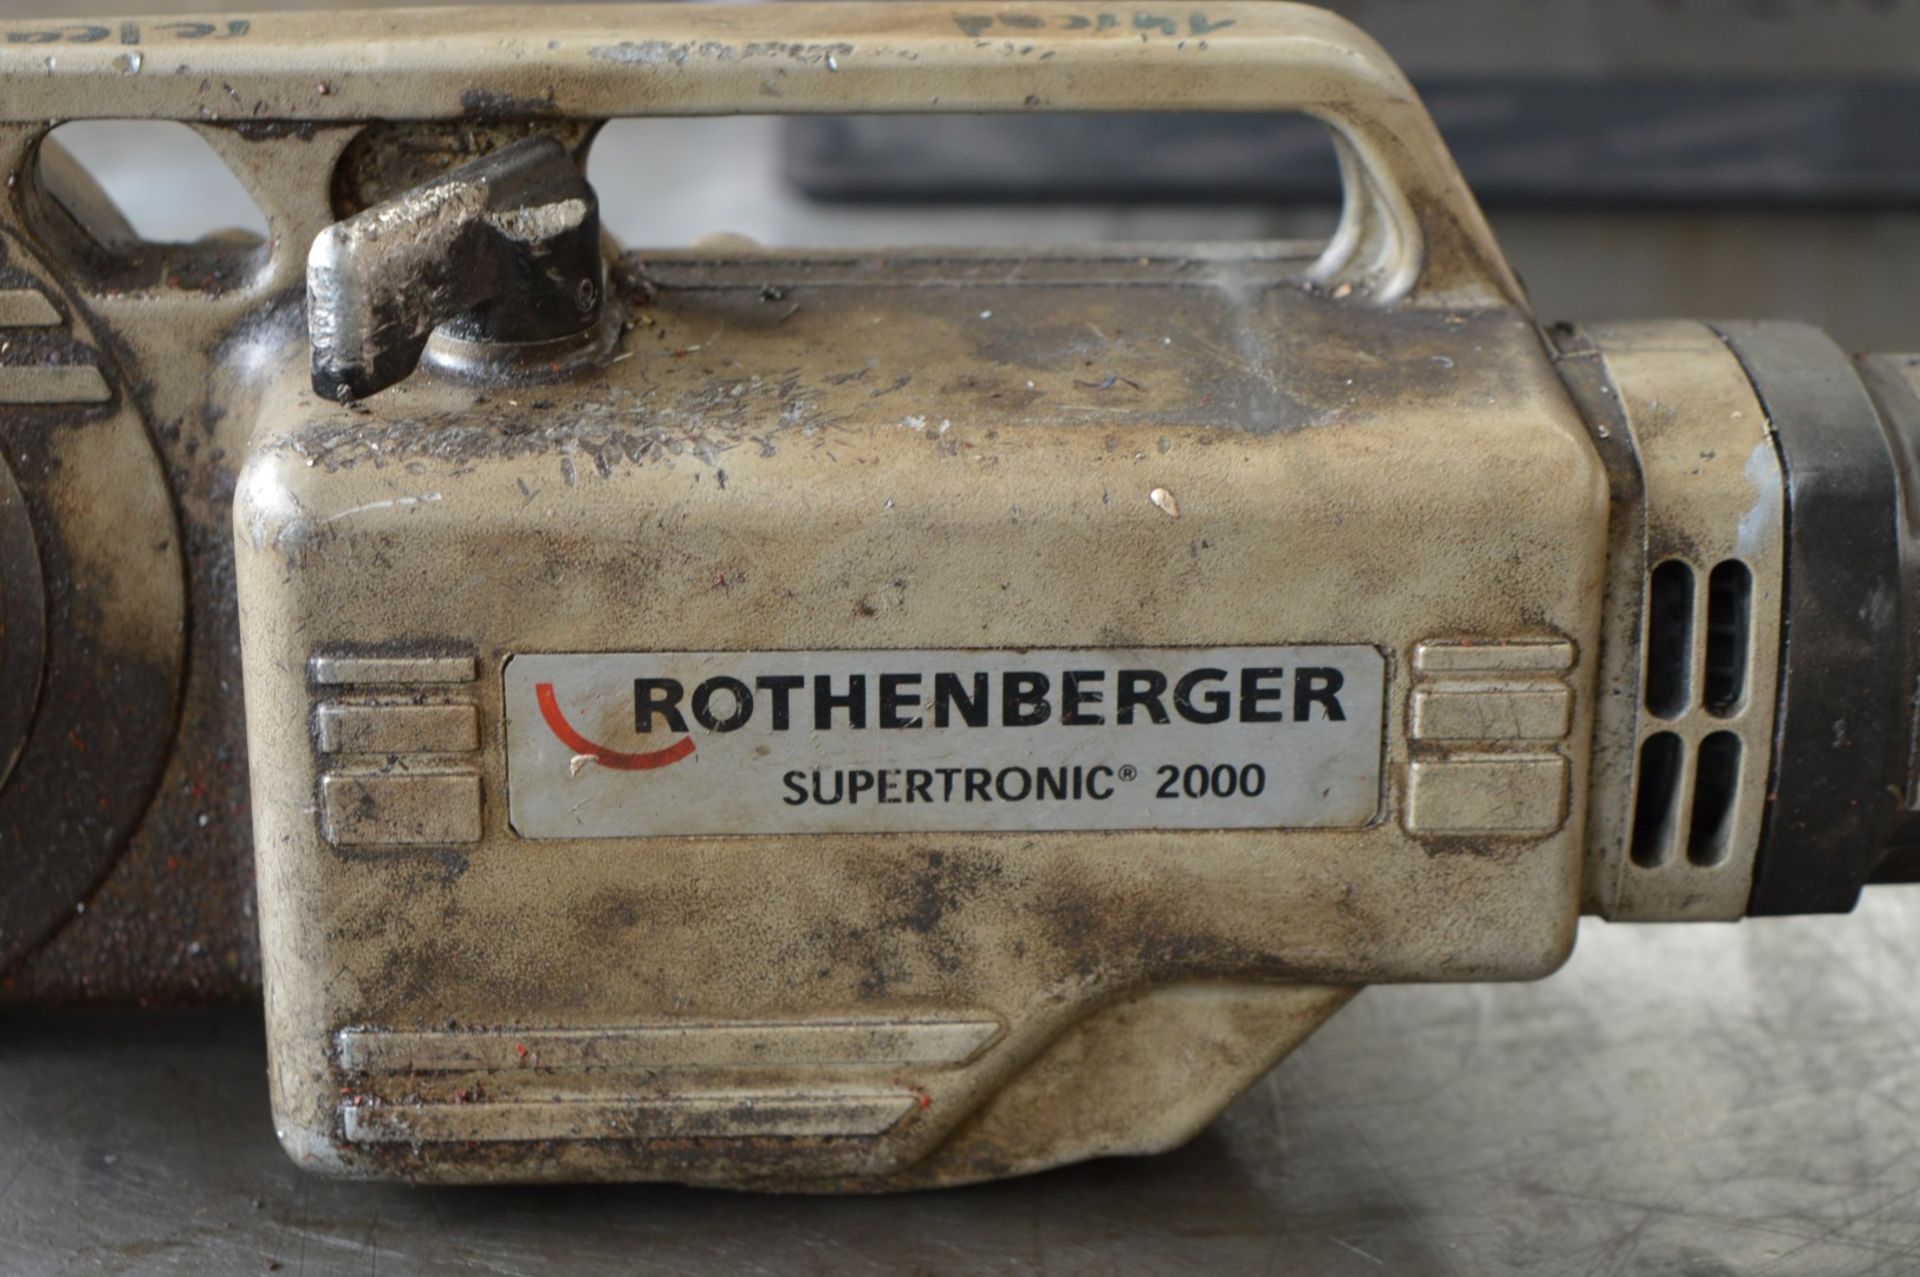 1 x Rothenberger Supertronic 2000 Portable Pipe Threader With Original Case - 240v - CL202 - Ref - Image 3 of 5